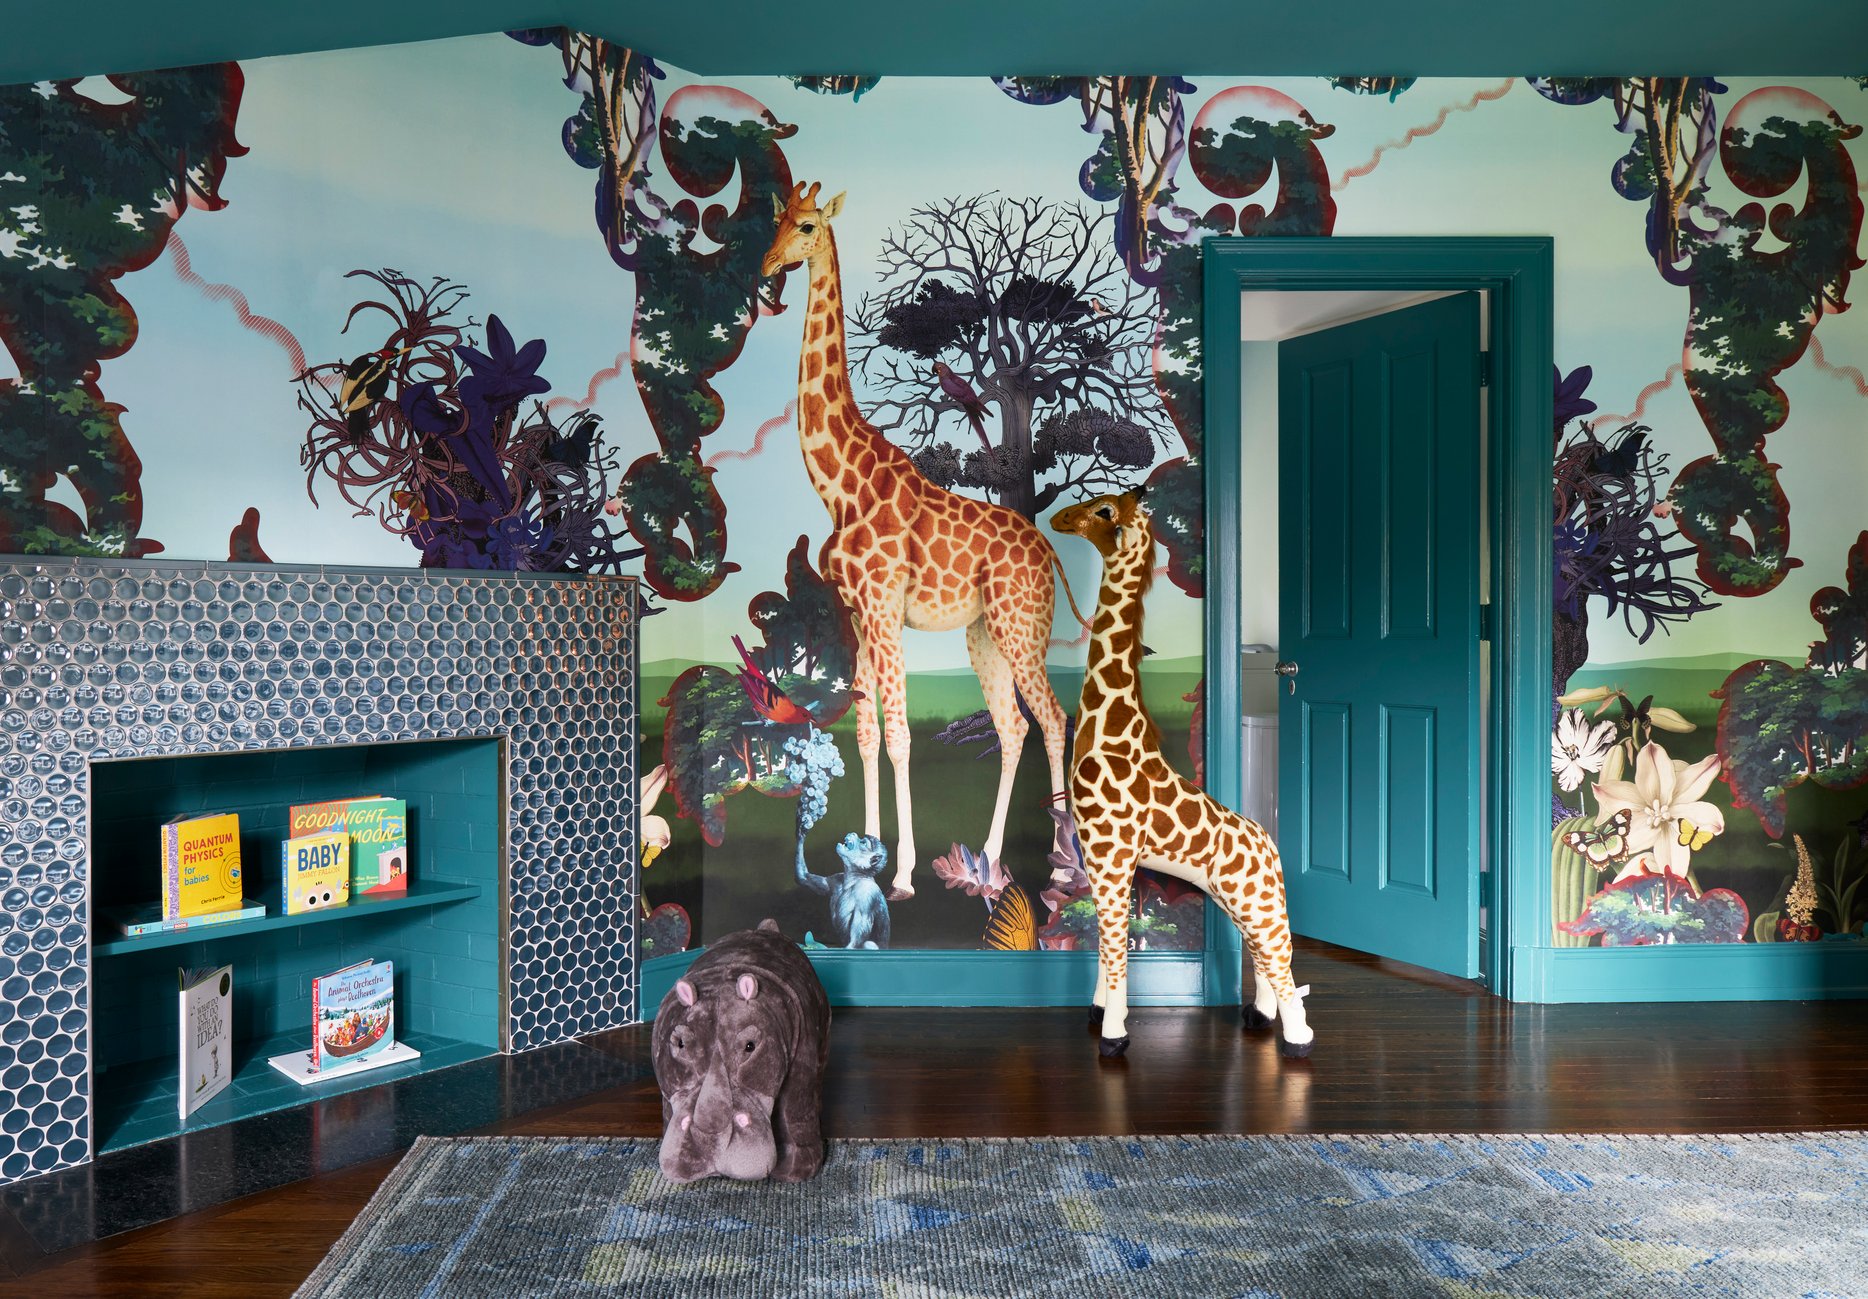 A child's playroom with a stuffed giraffe and hippo next to an old fireplace turned into a bookshelf. The room has wallpaper with giraffes, monkeys, trees, tropical flowers, and woodpeckers - interior design by Jasmin Reese Interiors, Chicago, USA. 